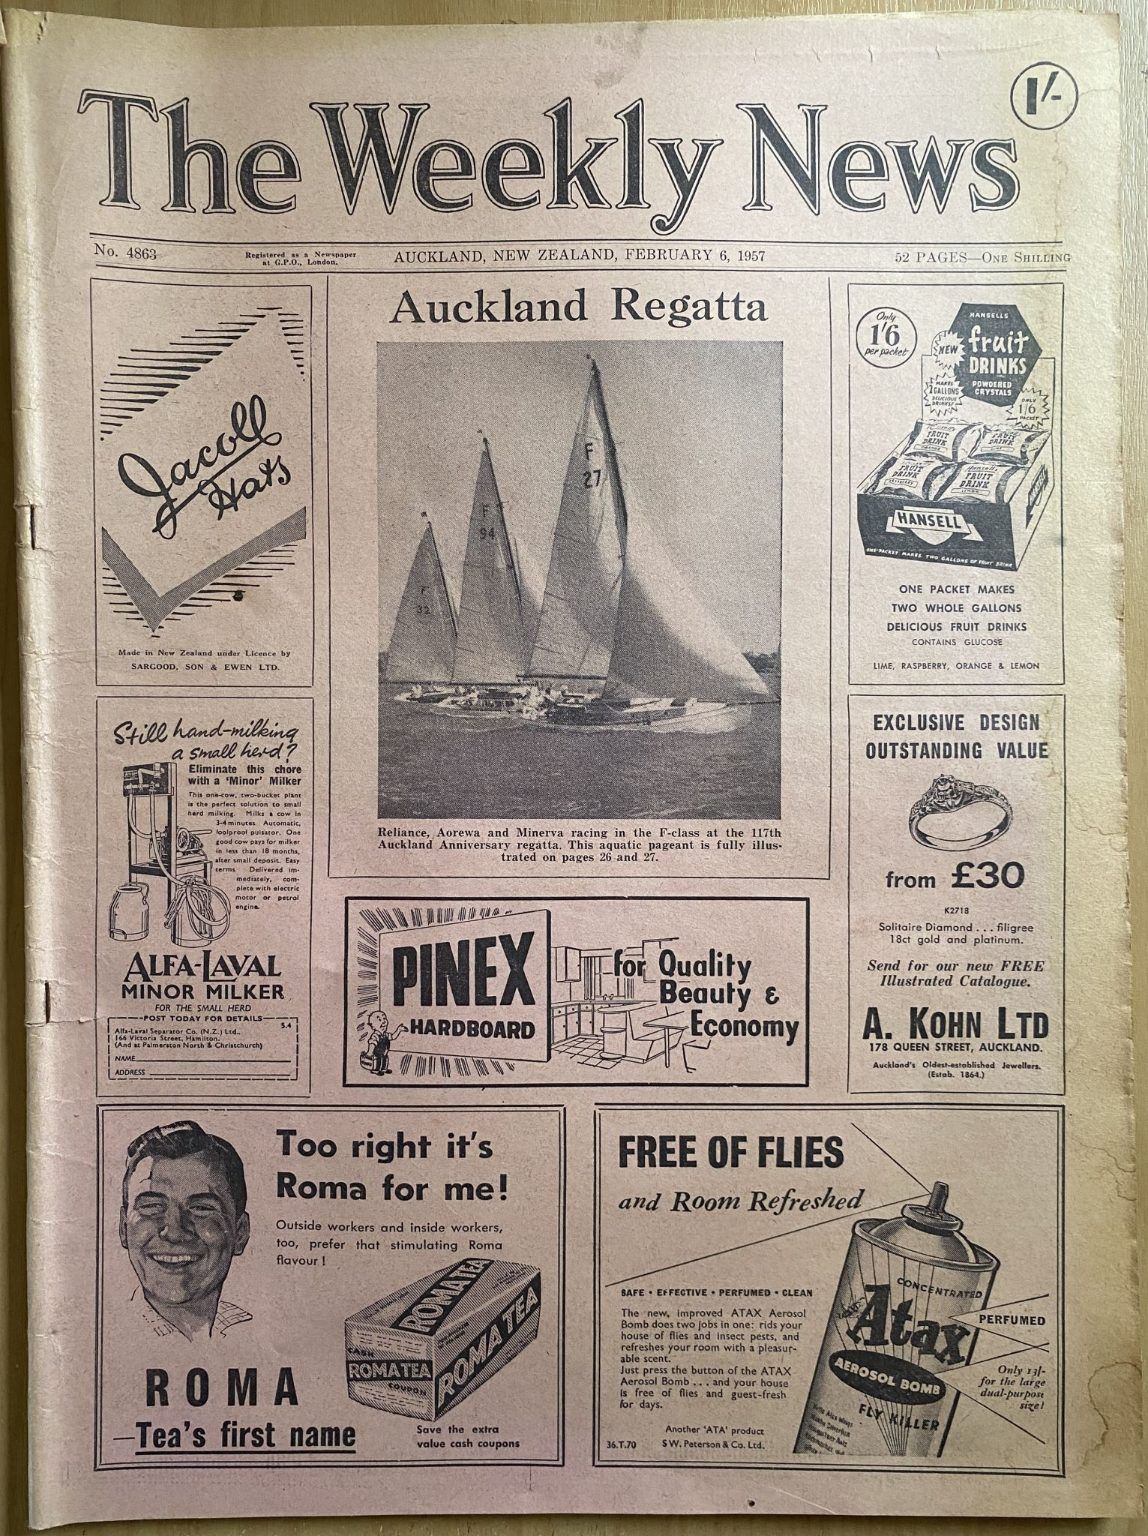 OLD NEWSPAPER: The Weekly News, No. 4863, 6 February 1957